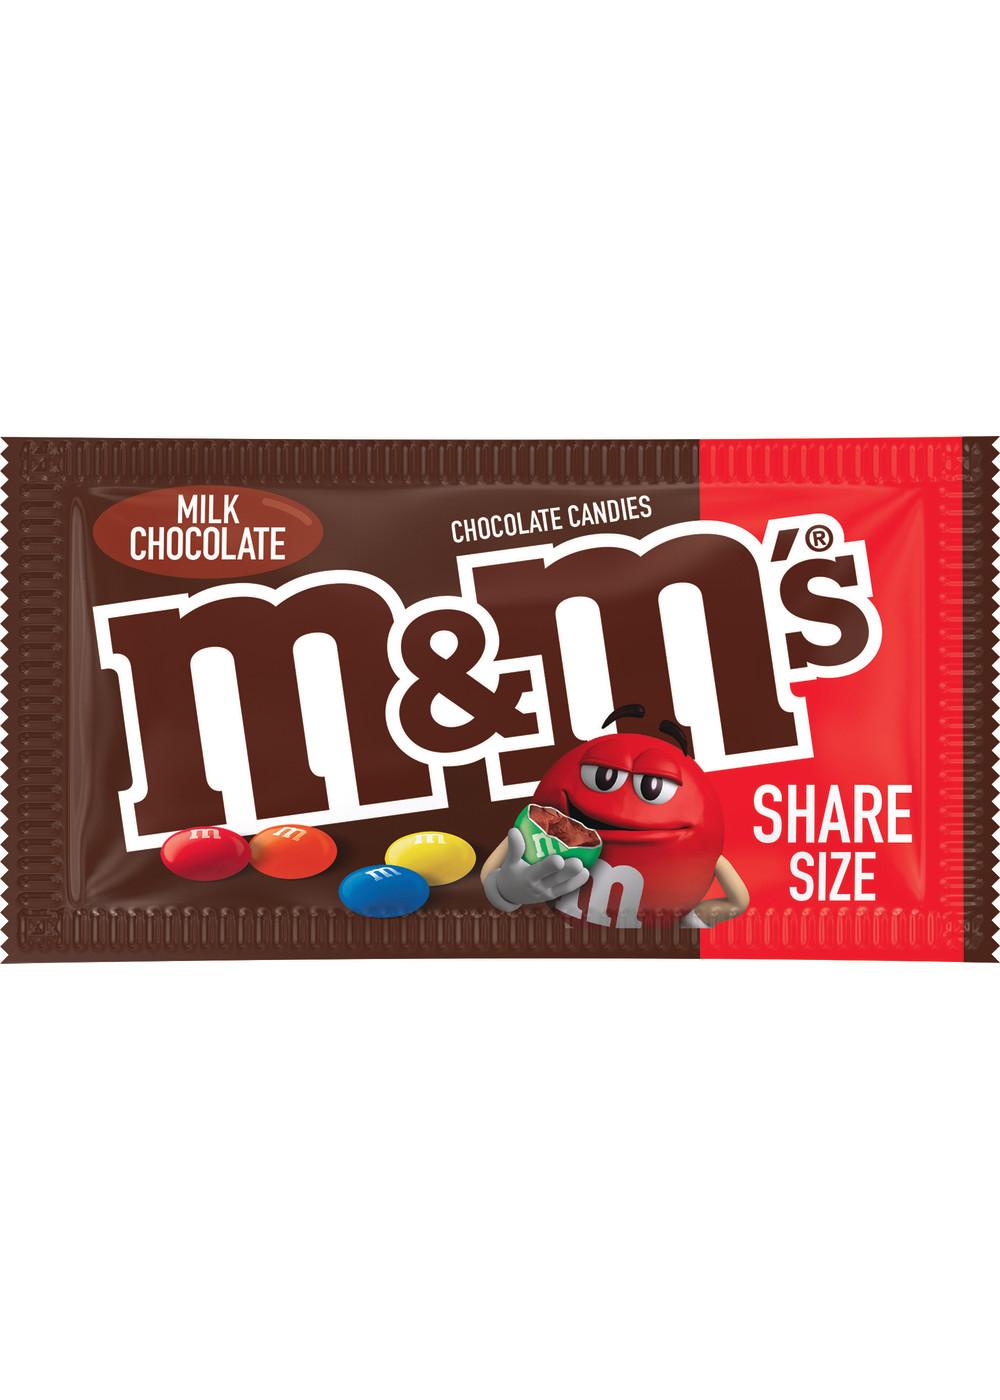 M&M's Milk Chocolate Red, White and Blue